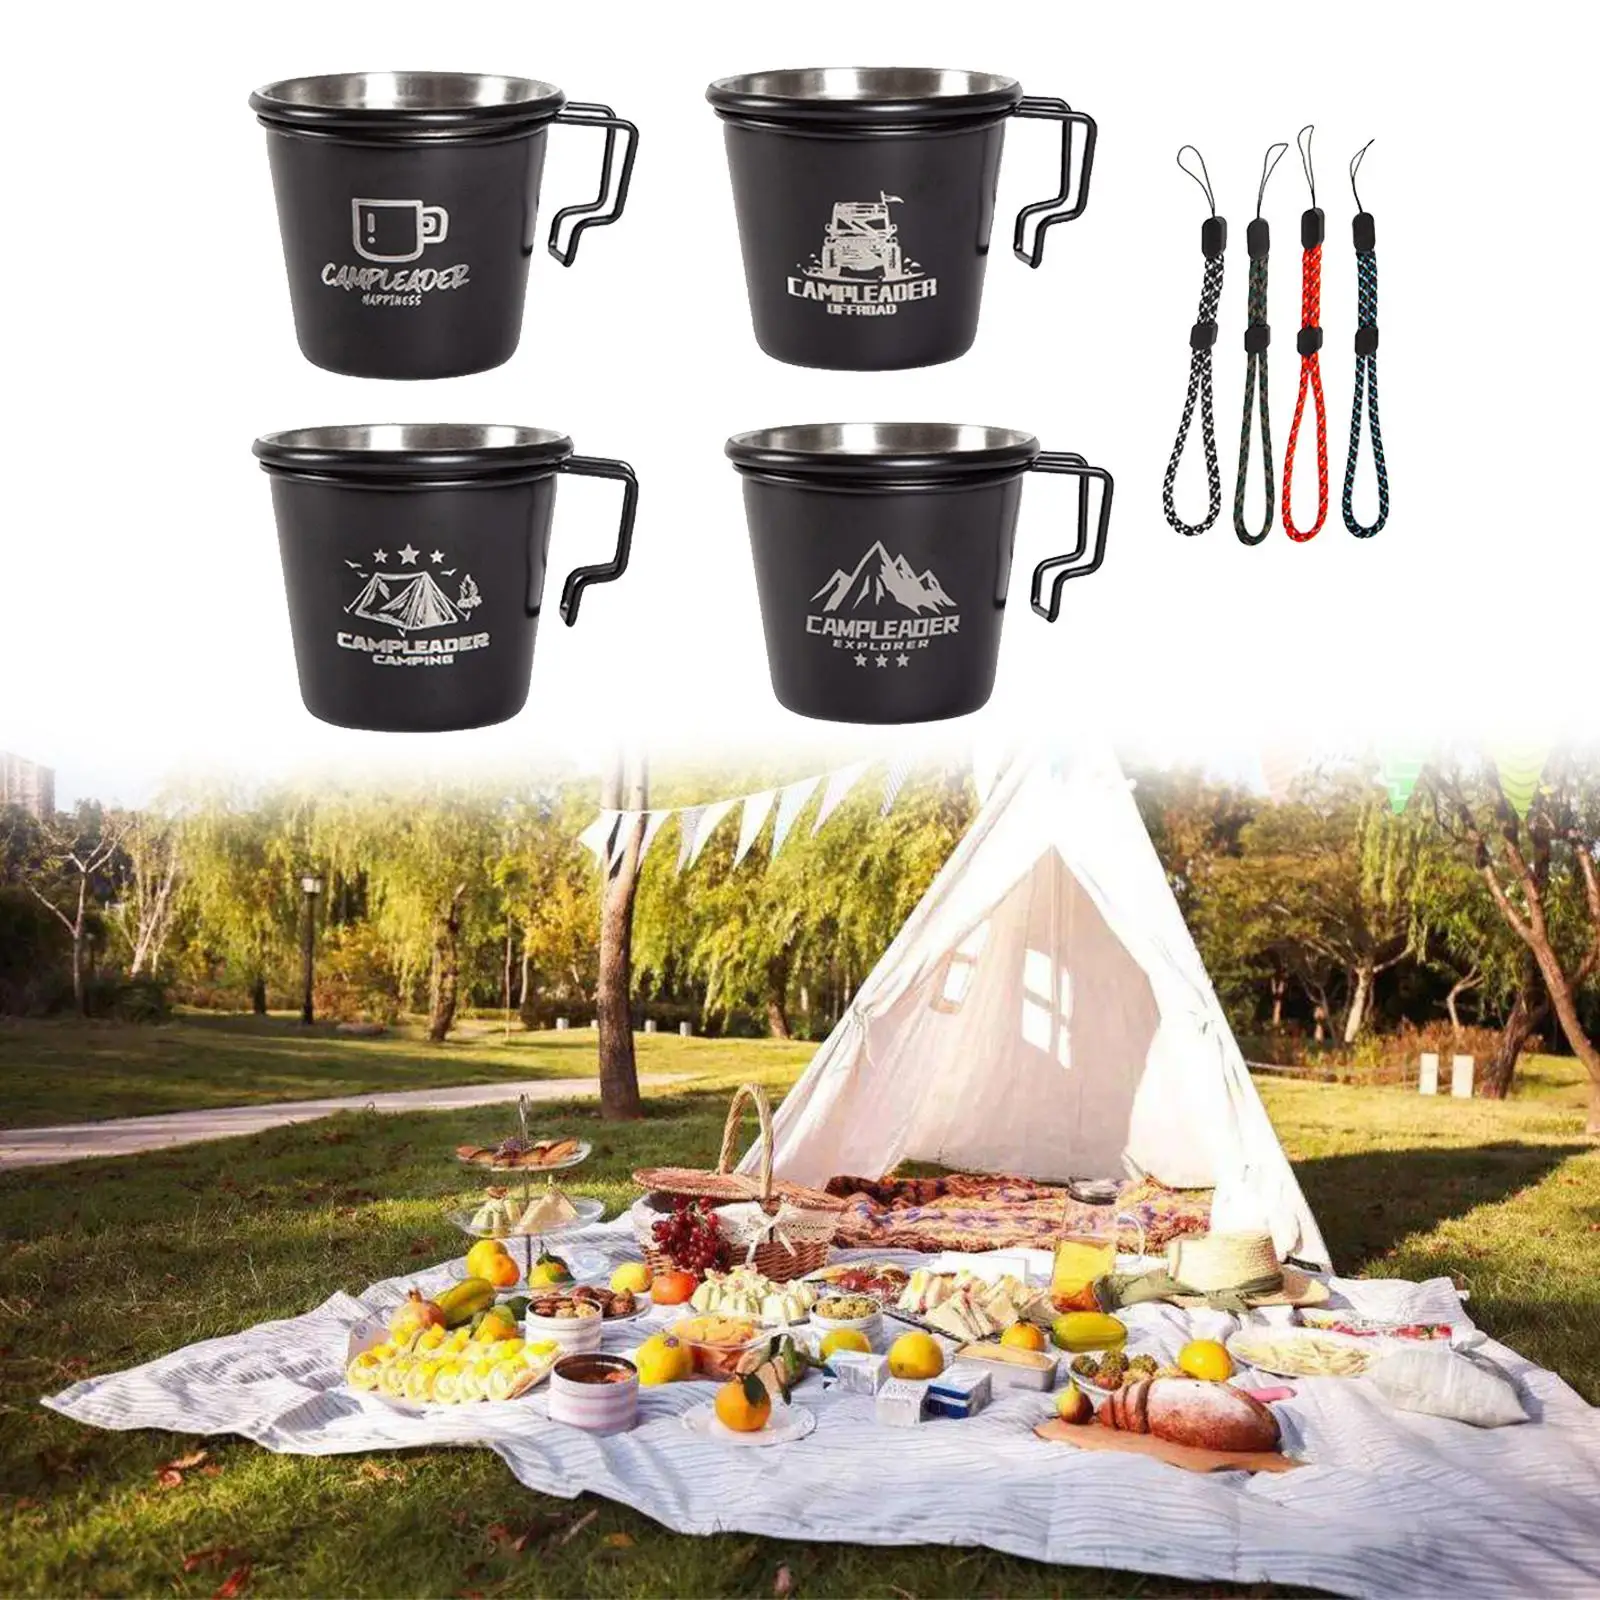 5 Pieces Outdoor Stainless Steel  Cups w/ Hanging Rope Practical Cutlery Utensils Mugs Drinkware for  Fishing Backpacking